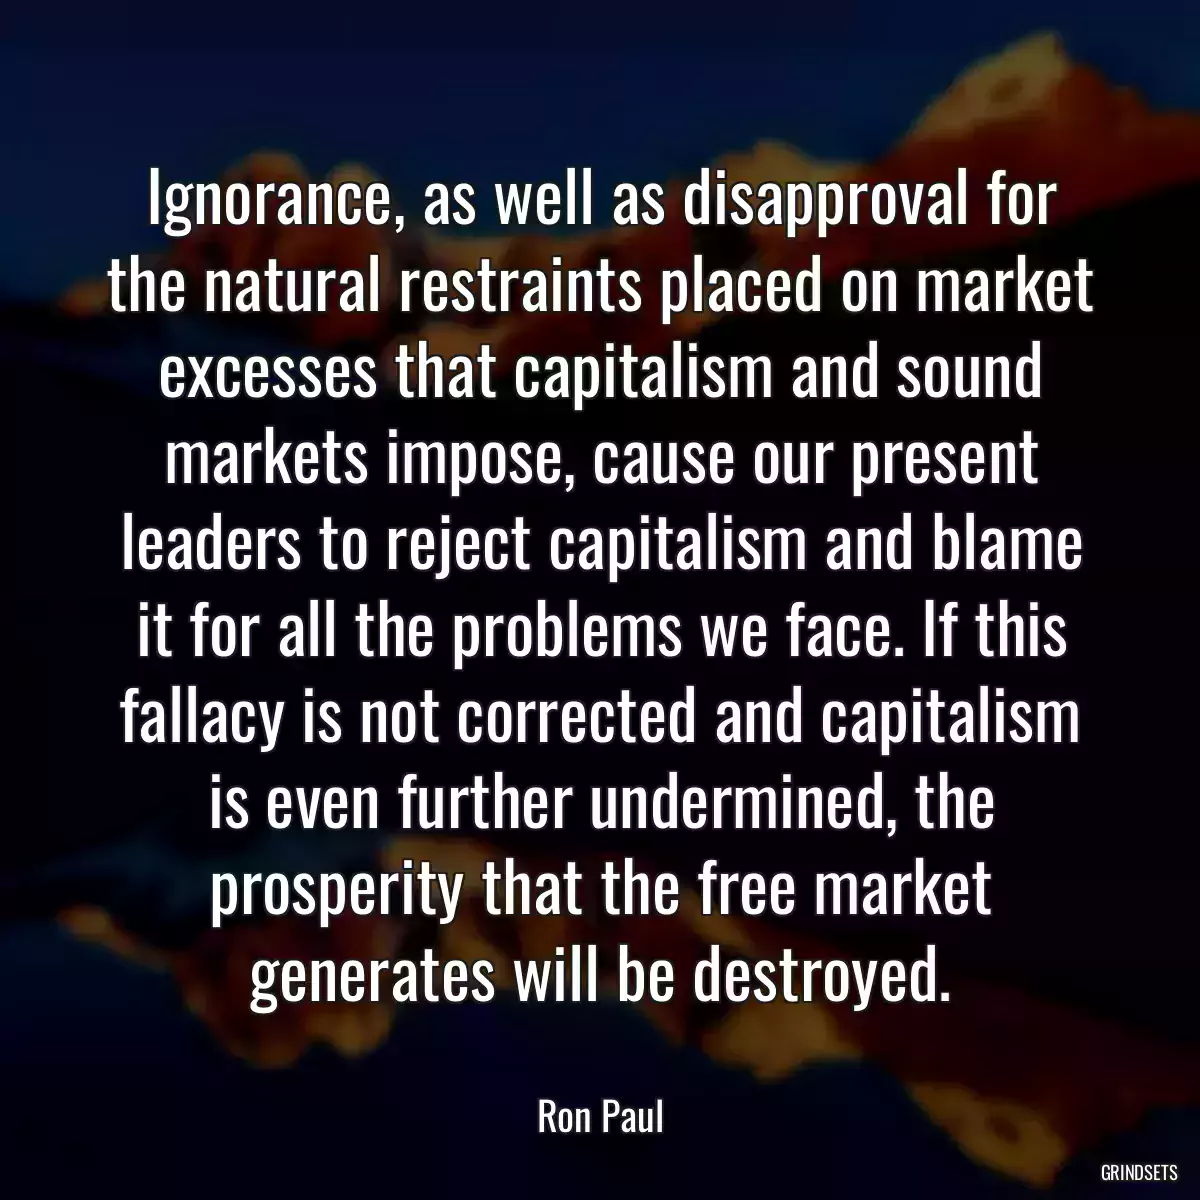 Ignorance, as well as disapproval for the natural restraints placed on market excesses that capitalism and sound markets impose, cause our present leaders to reject capitalism and blame it for all the problems we face. If this fallacy is not corrected and capitalism is even further undermined, the prosperity that the free market generates will be destroyed.